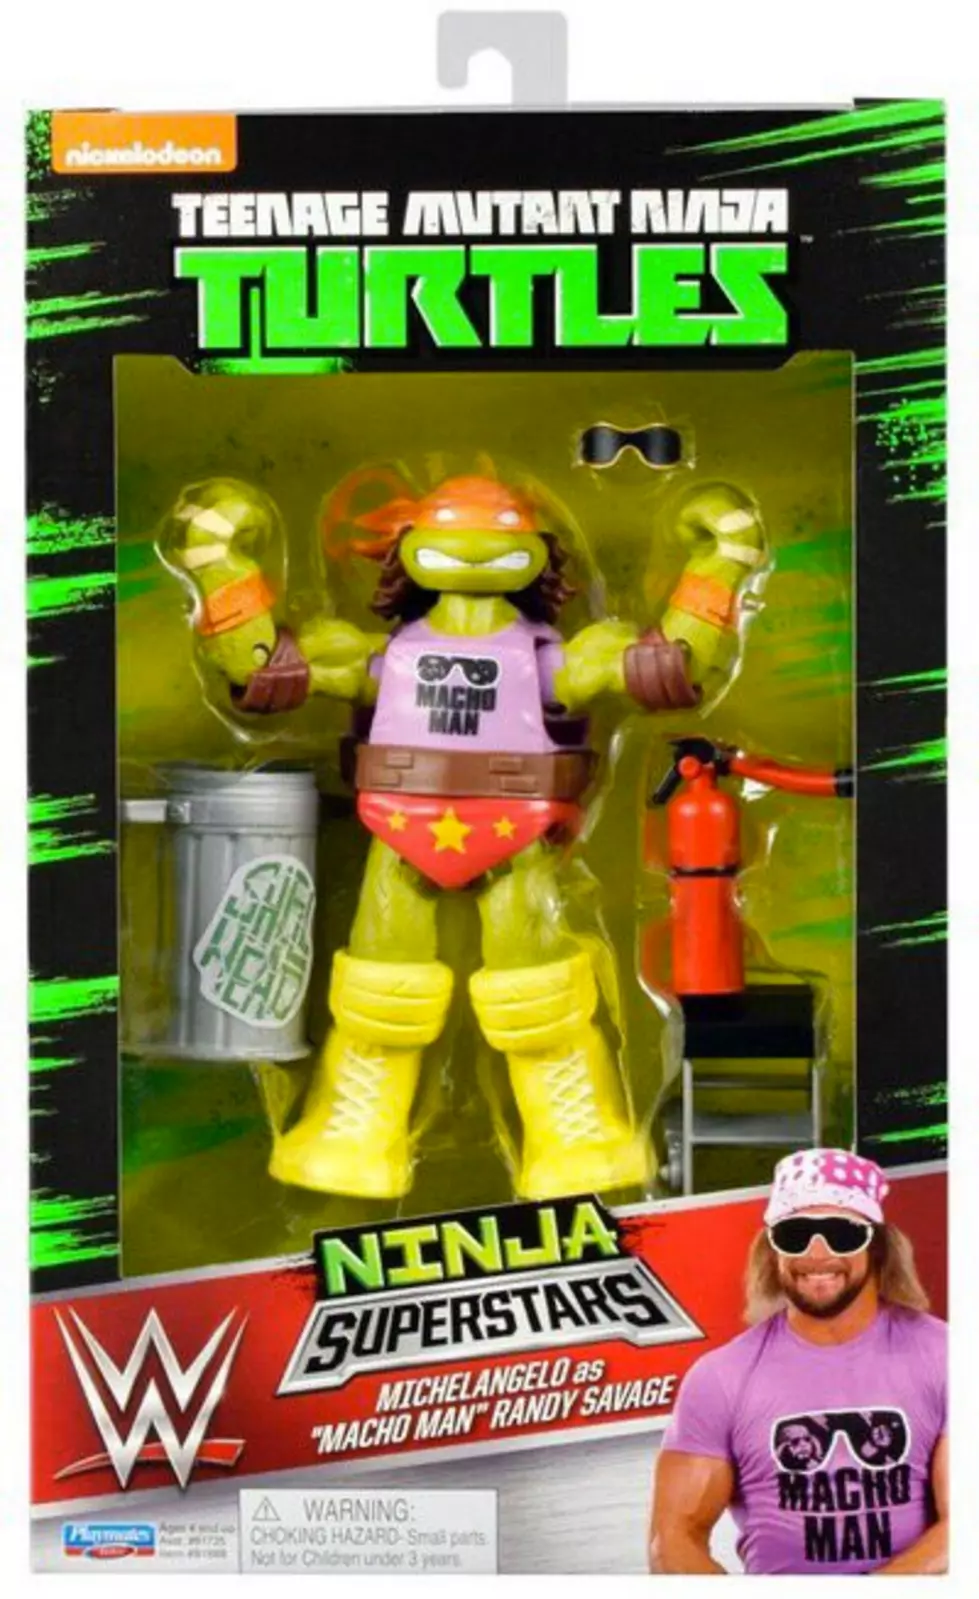 You Are Not Dreaming: Teenage Mutant Ninja Turtles And WWE Team Up For &#8216;Ninja Superstars&#8217; Action Figures